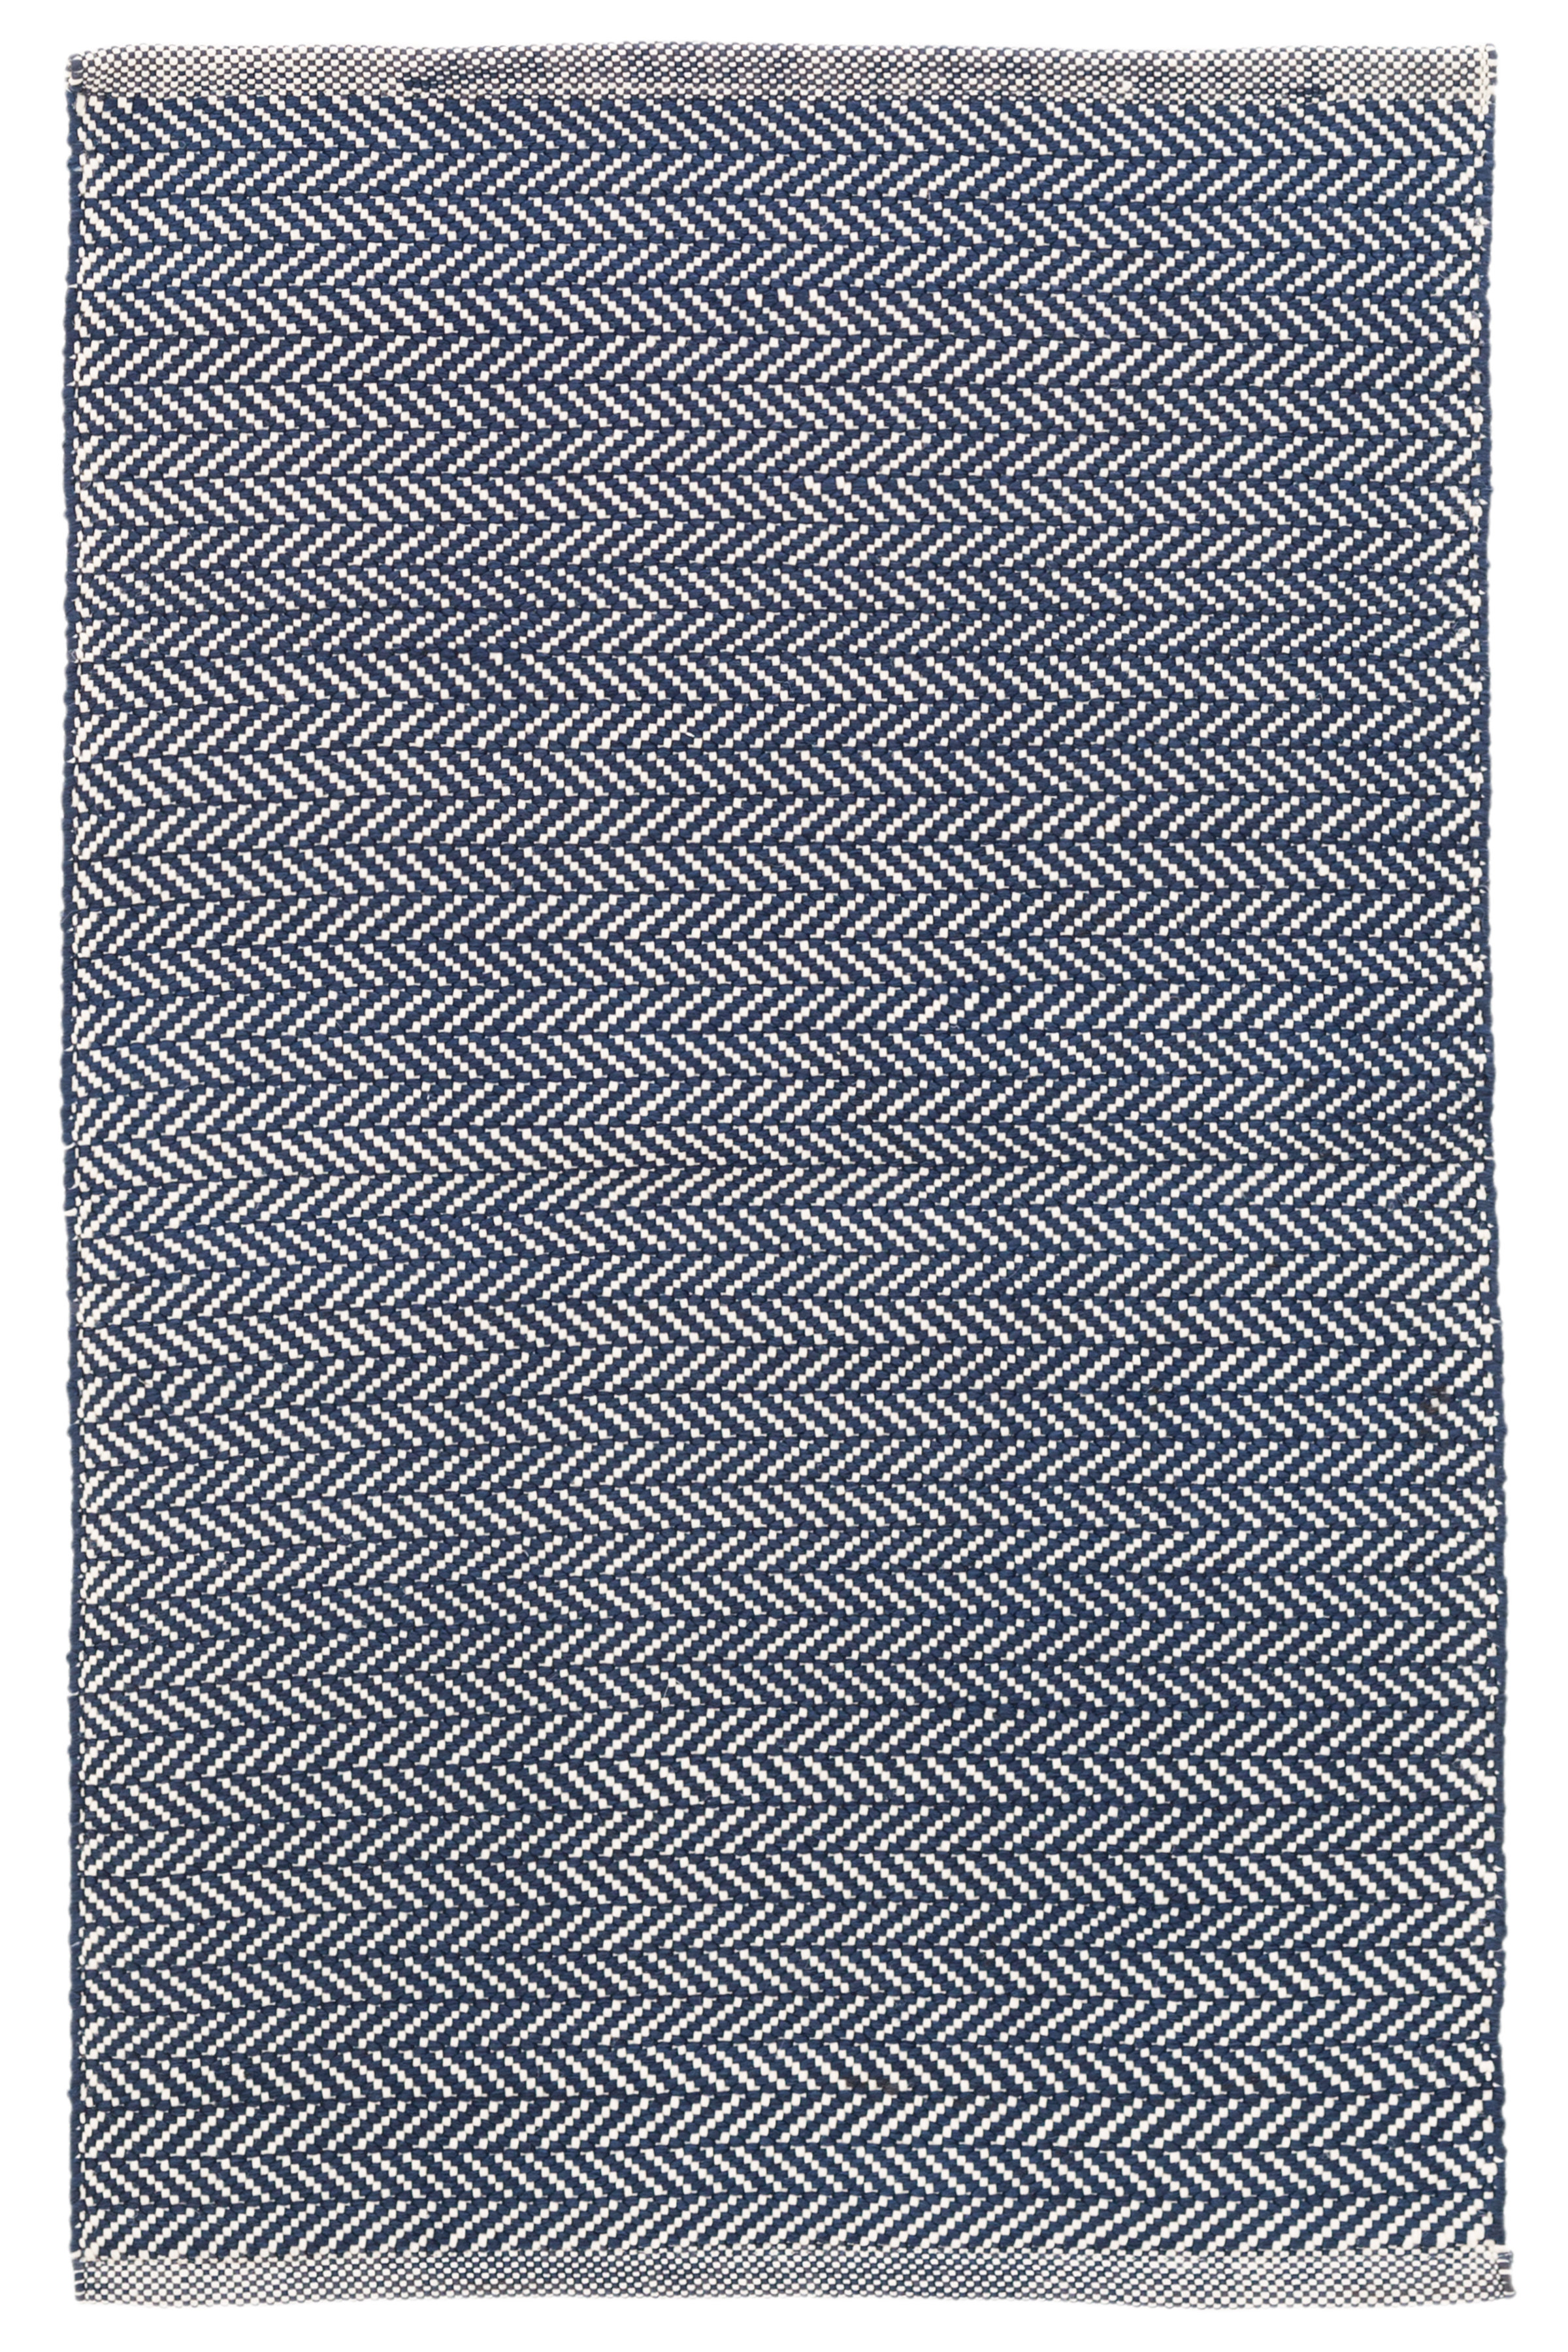 2 Sizes **FREE DELIVERY* Hayes Herringbone Style Ivory Blue Indoor Outdoor Rug 